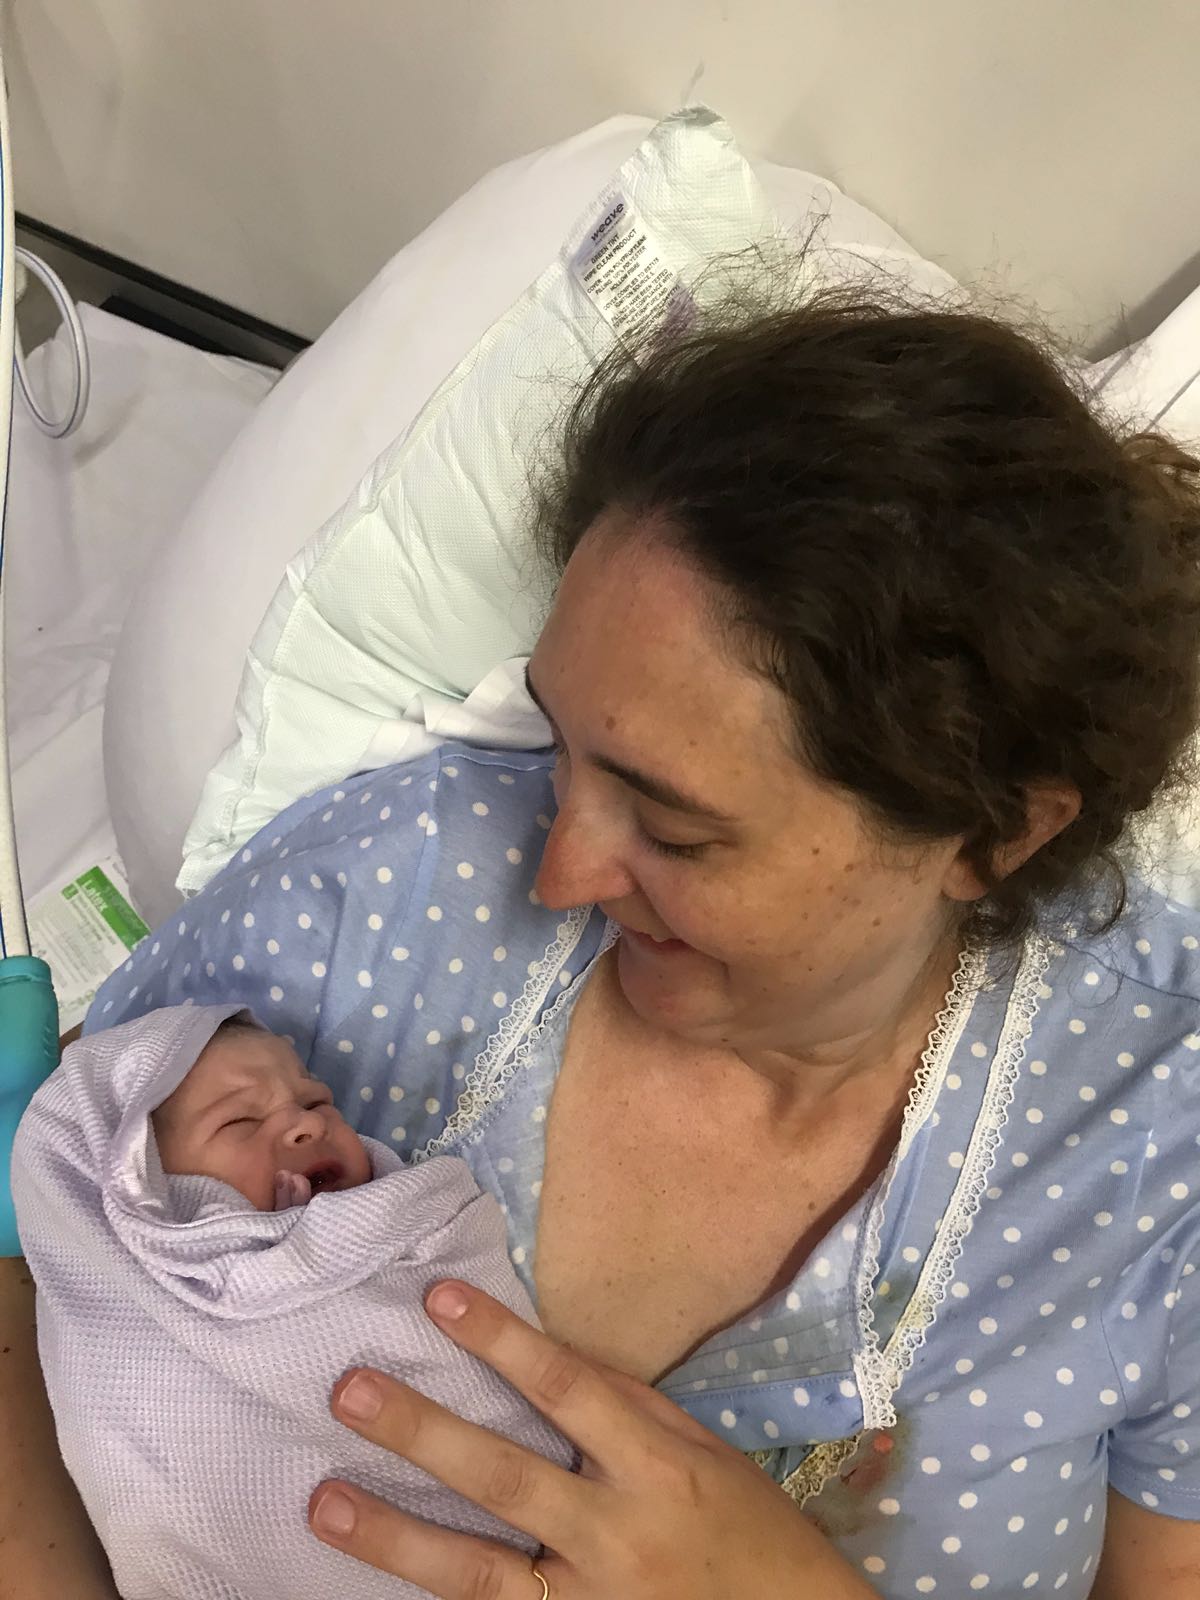 My birth story- short and sweet